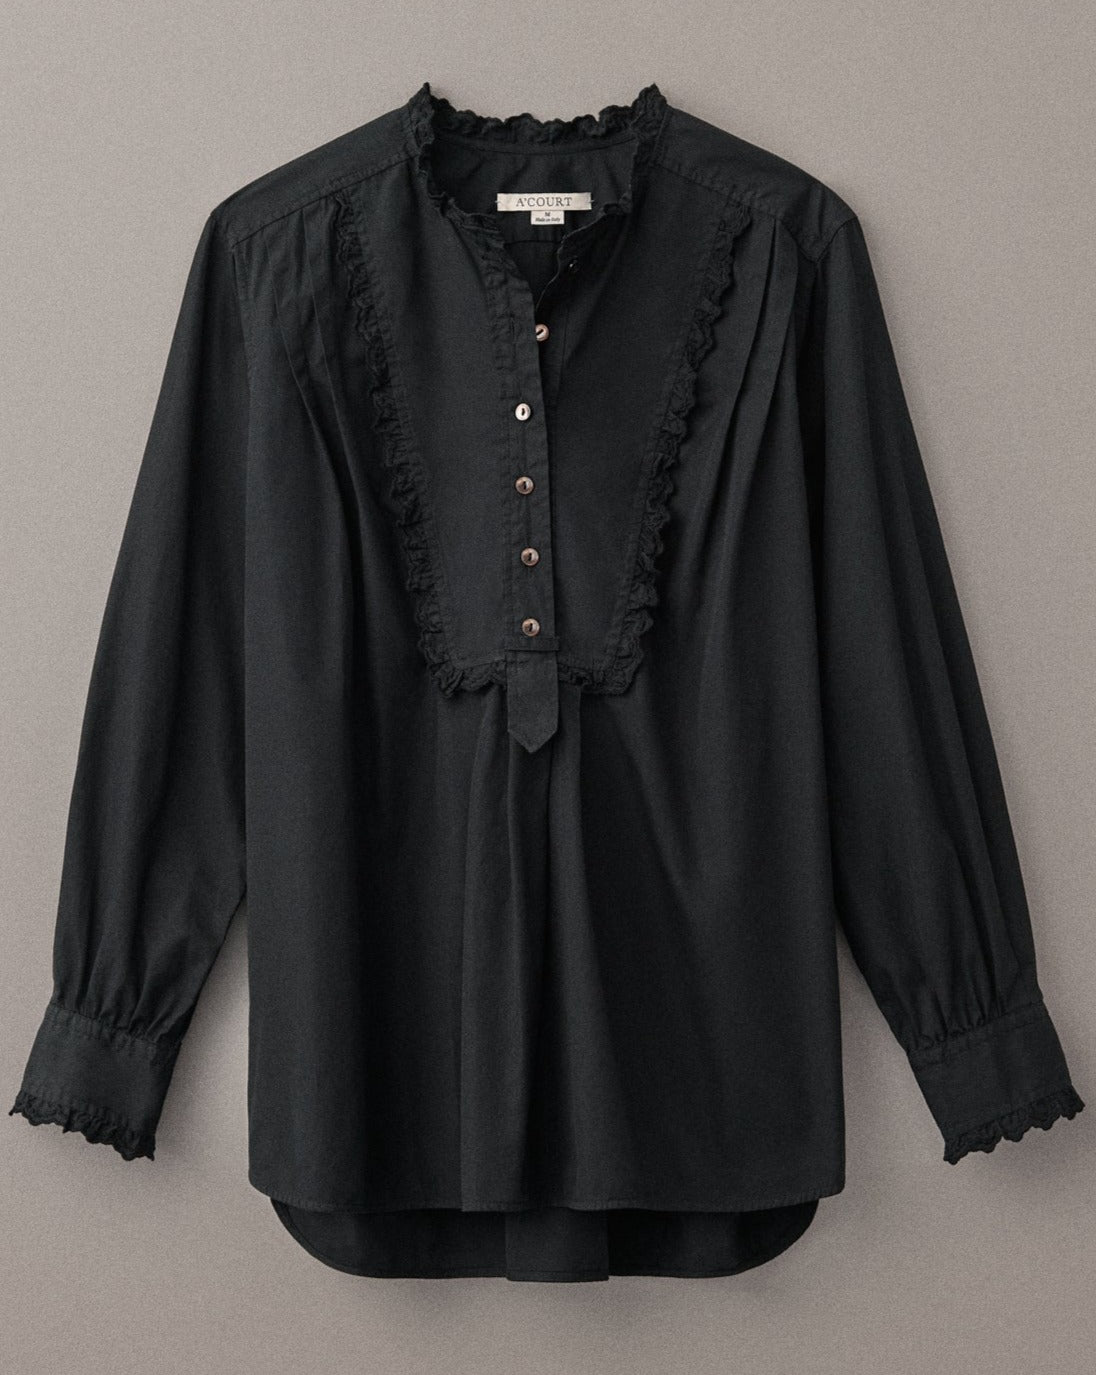 A black cotton blouse with a tuxedo-style bib, eyelet trim and half button closure lies flat on a light brown field.